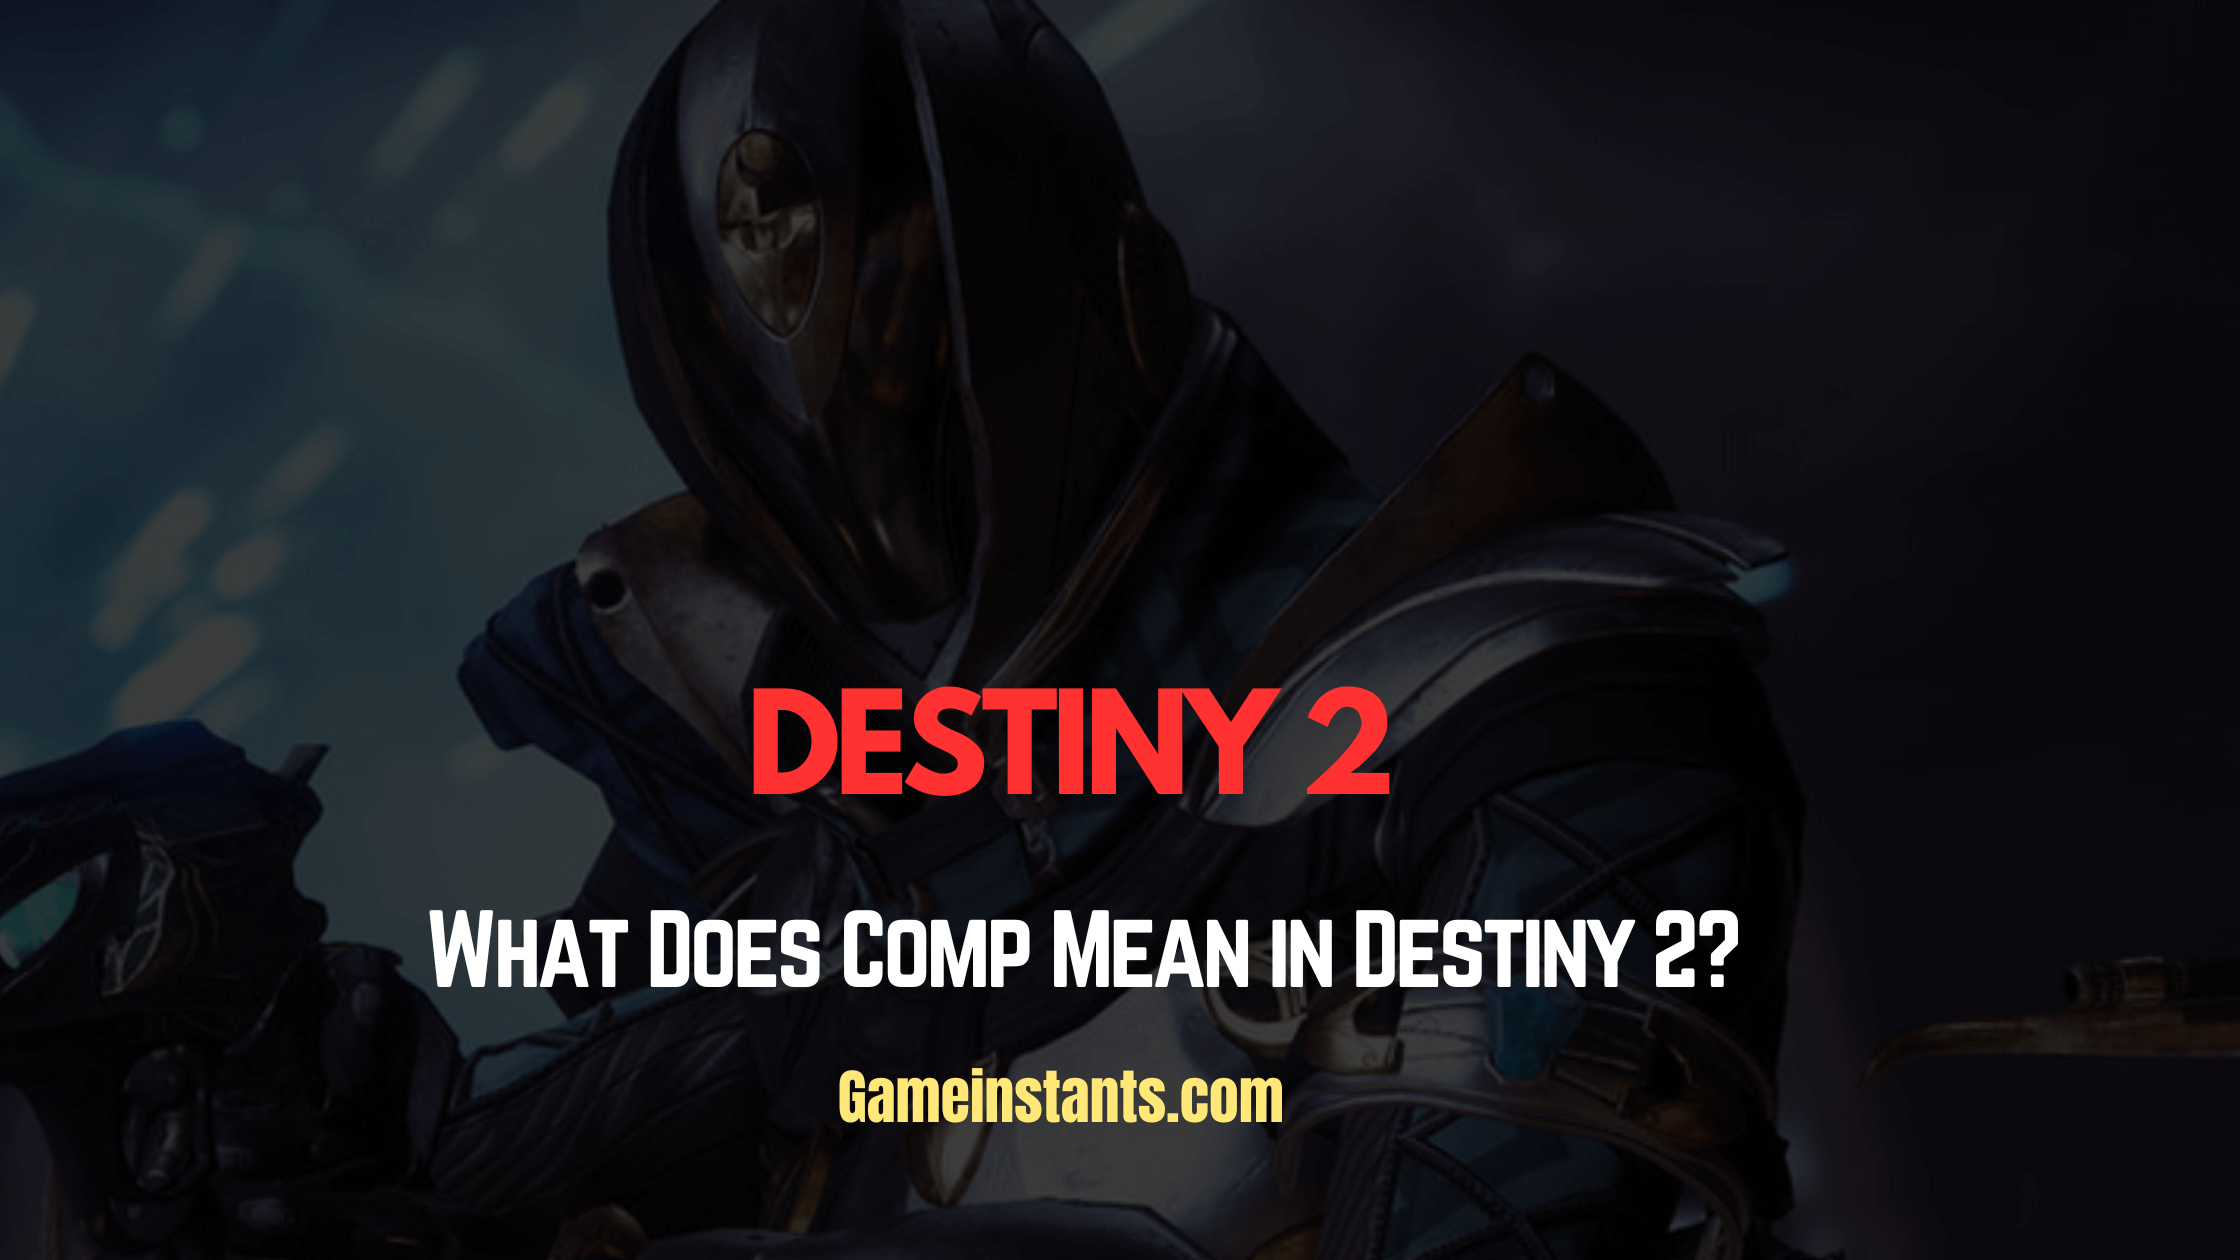 What Does Comp Mean in Destiny 2